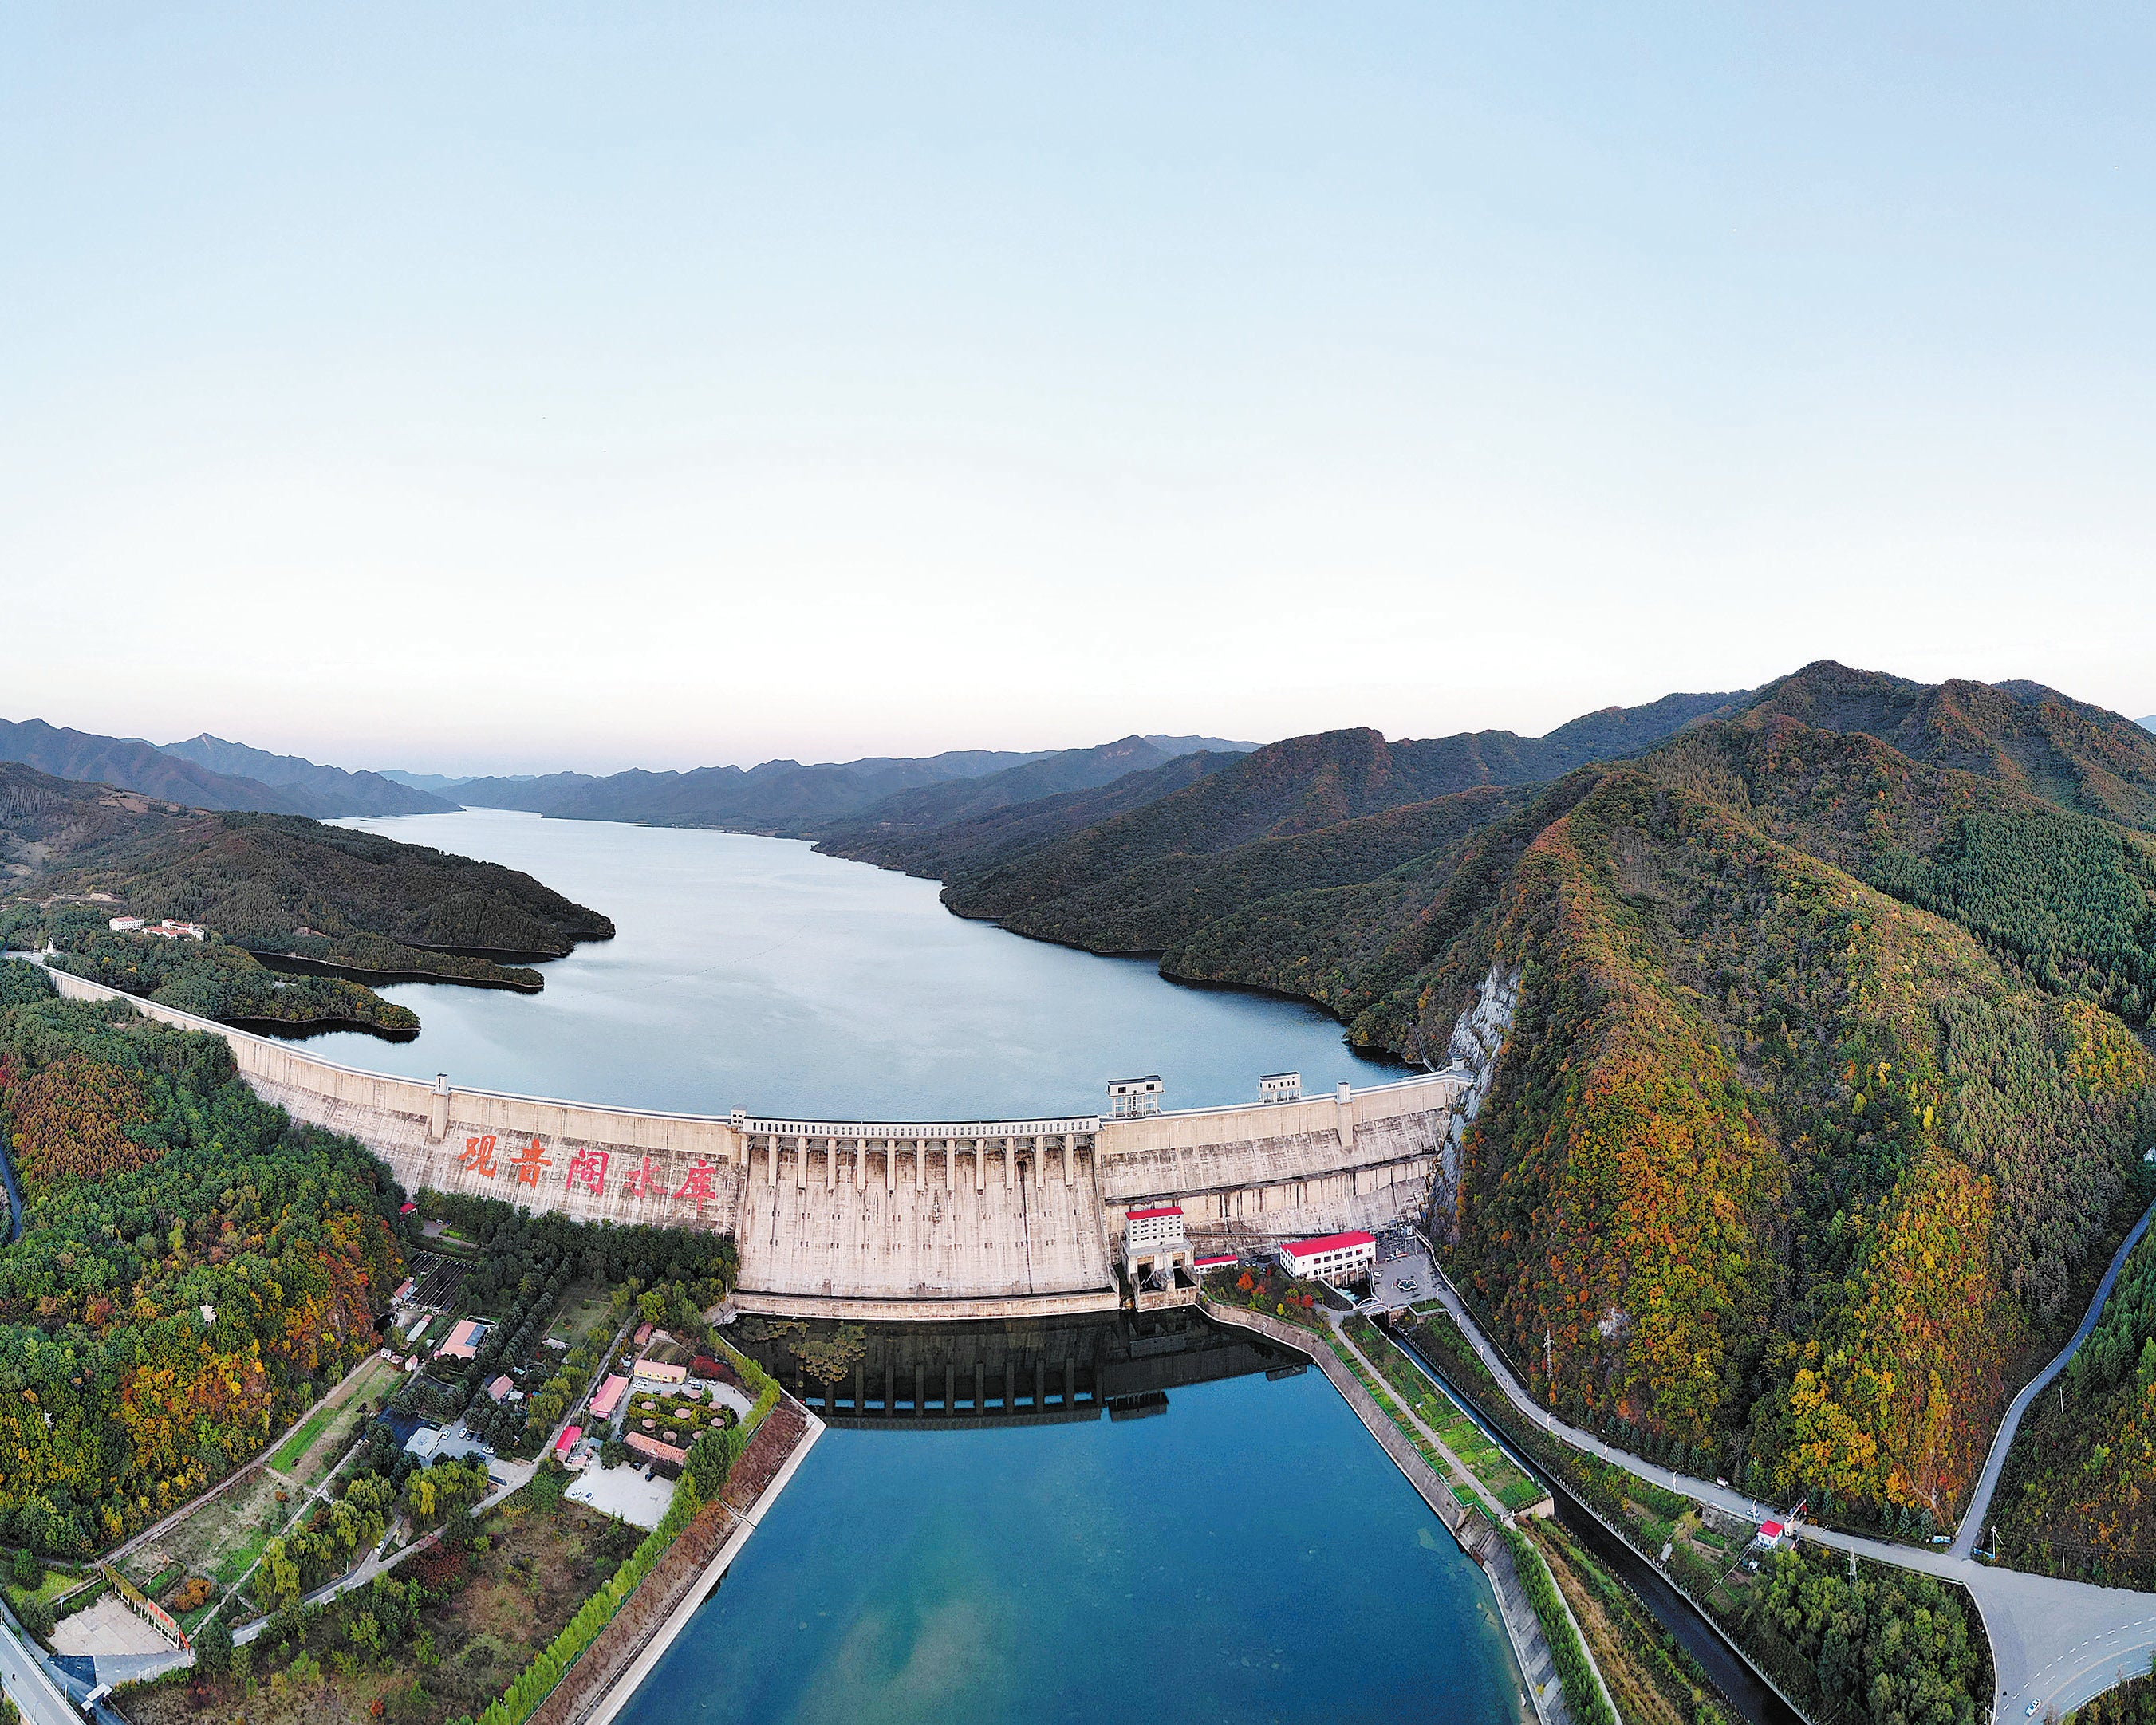 A bird’s eye view of the Guanyinge Reservoir in Benxi, Liaoning province